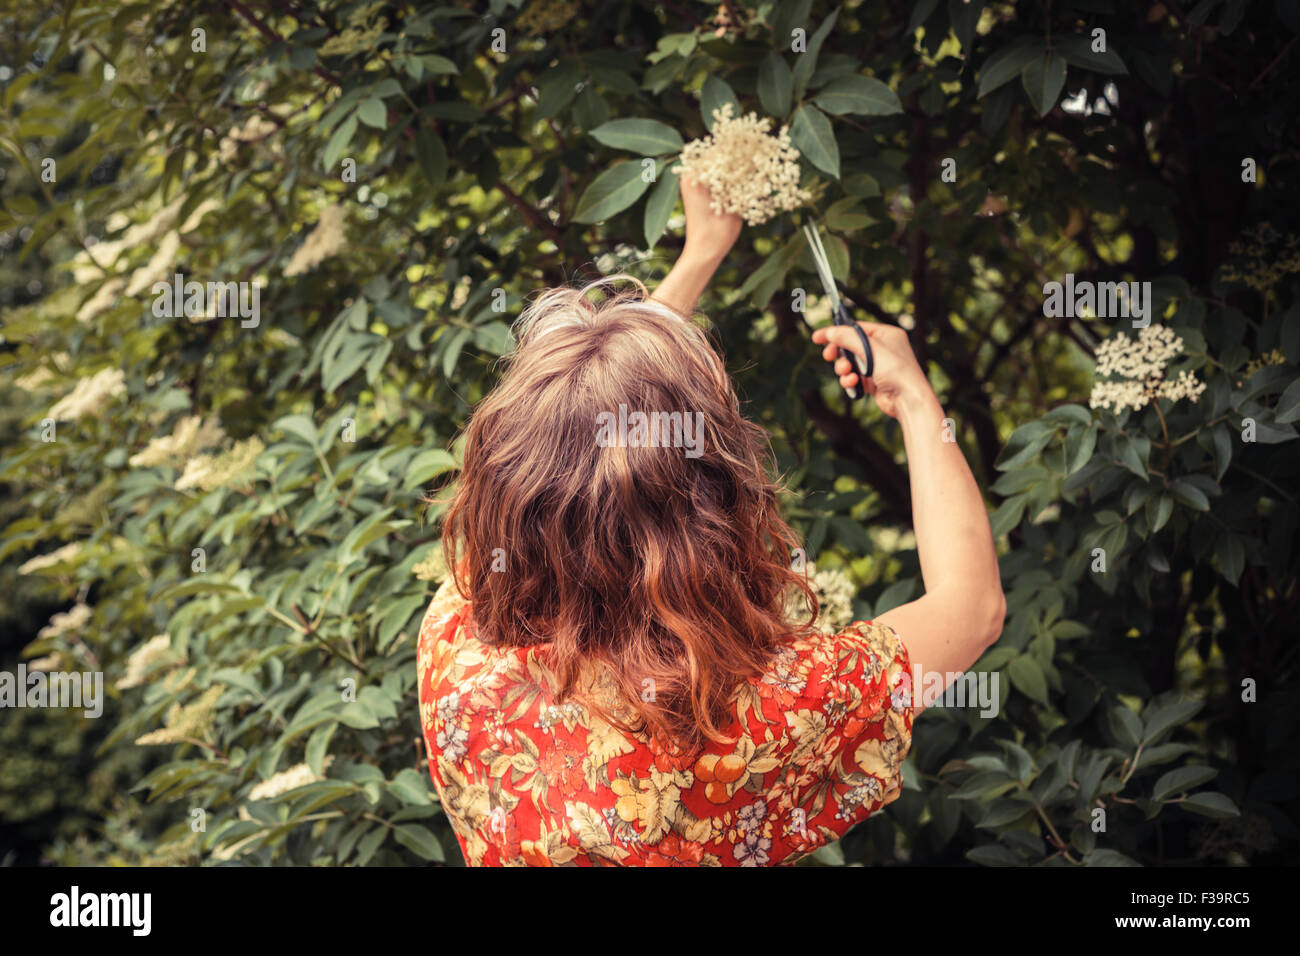 A young woman is cutting elderflowers from a tree with scissors Stock Photo